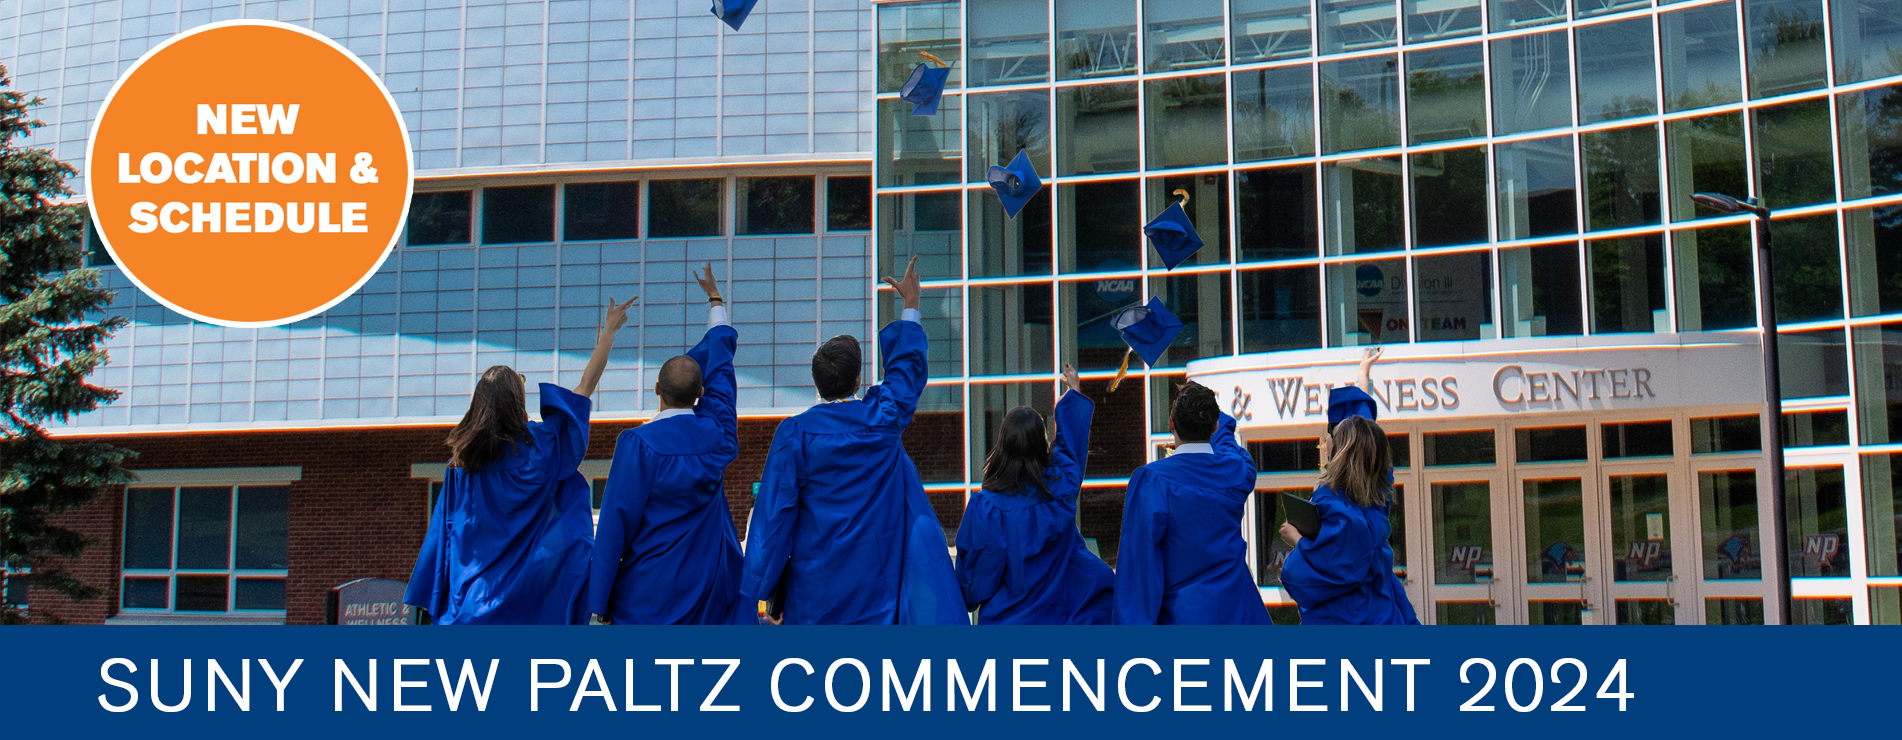 Commencement 2024 - new location and Schedule